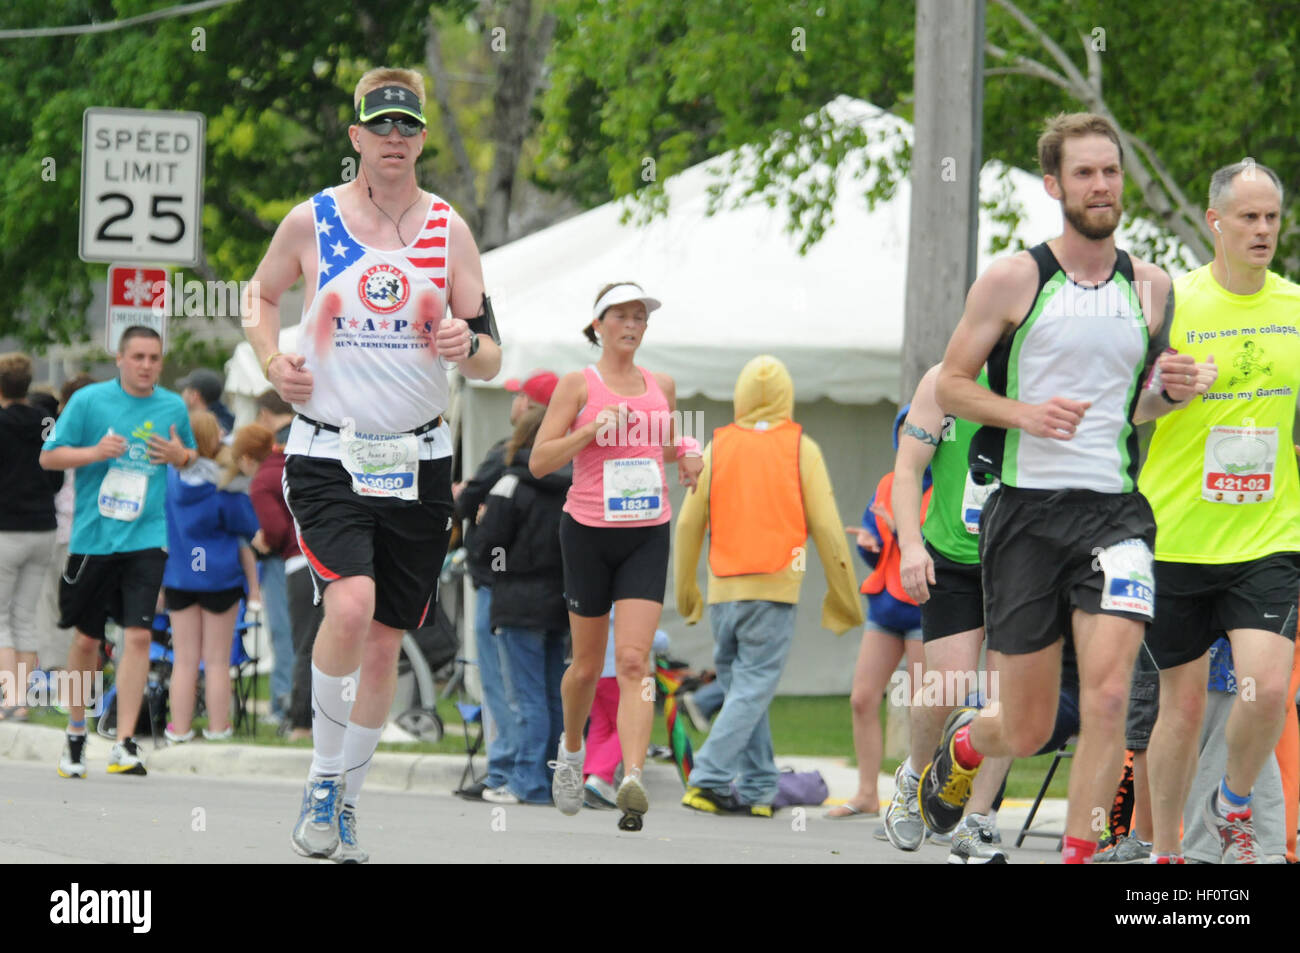 Aaron Wolf, the North Dakota National Guard family readiness support assistant, runs the Fargo Marathon, May 19, Fargo, N.D. He was running in honor of U.S. Army Spc. Keenan Cooper on the Tragedy Assistance Program for Survivors (TAPS) Run and Remember Team. Marathoners fight through a number of difficulties over the course of a 26.2-mile race, from losing toenails to bleeding from fabric chafing. The TAPS team is running in the Fargo Marathon events in memory of military service members who died while in service to the United States military, and also to raise money for the TAPS programs that Stock Photo